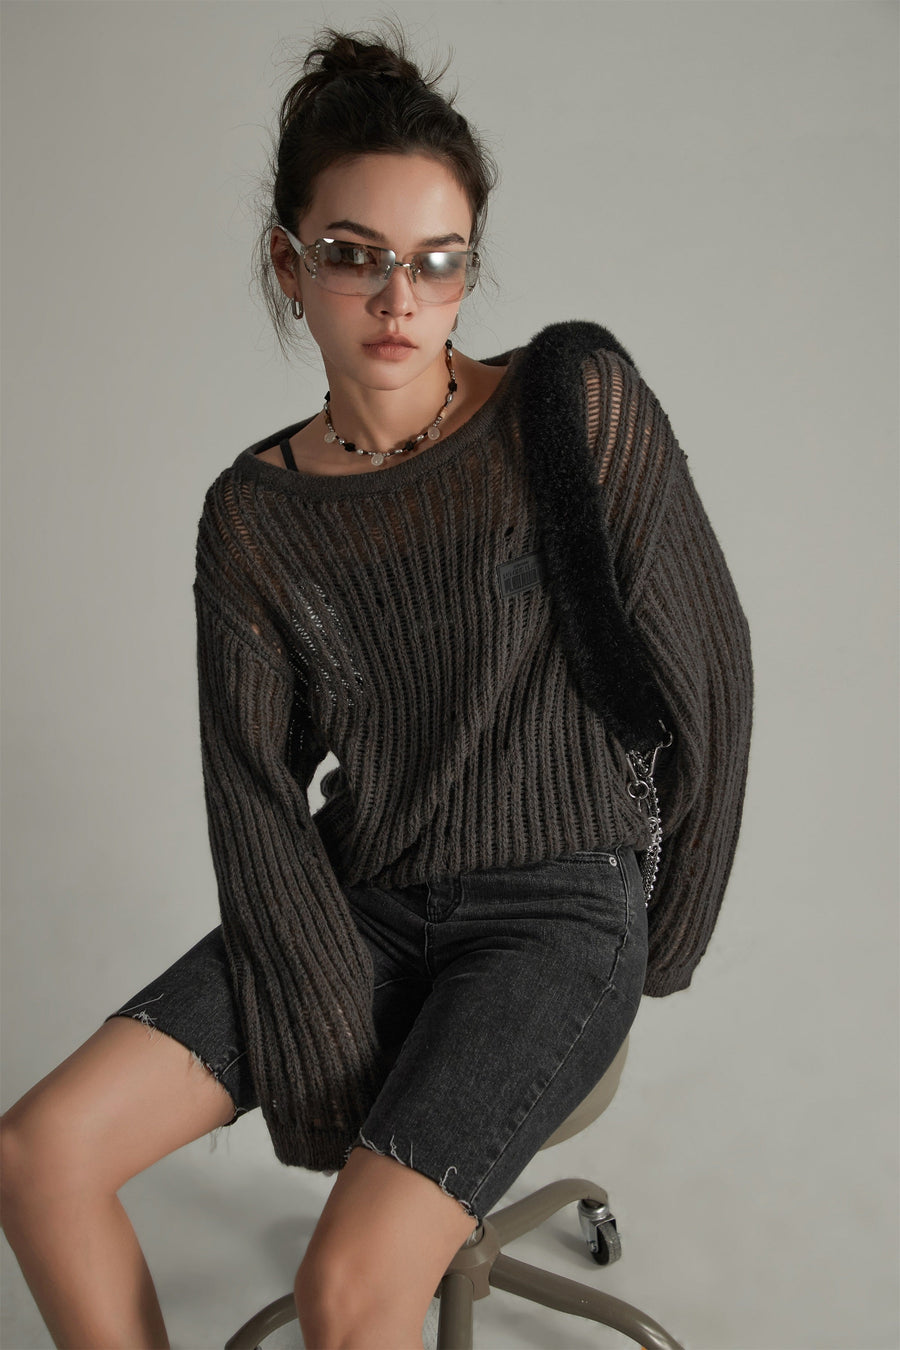 Ribbed Open Knit Loose Fit Sweater